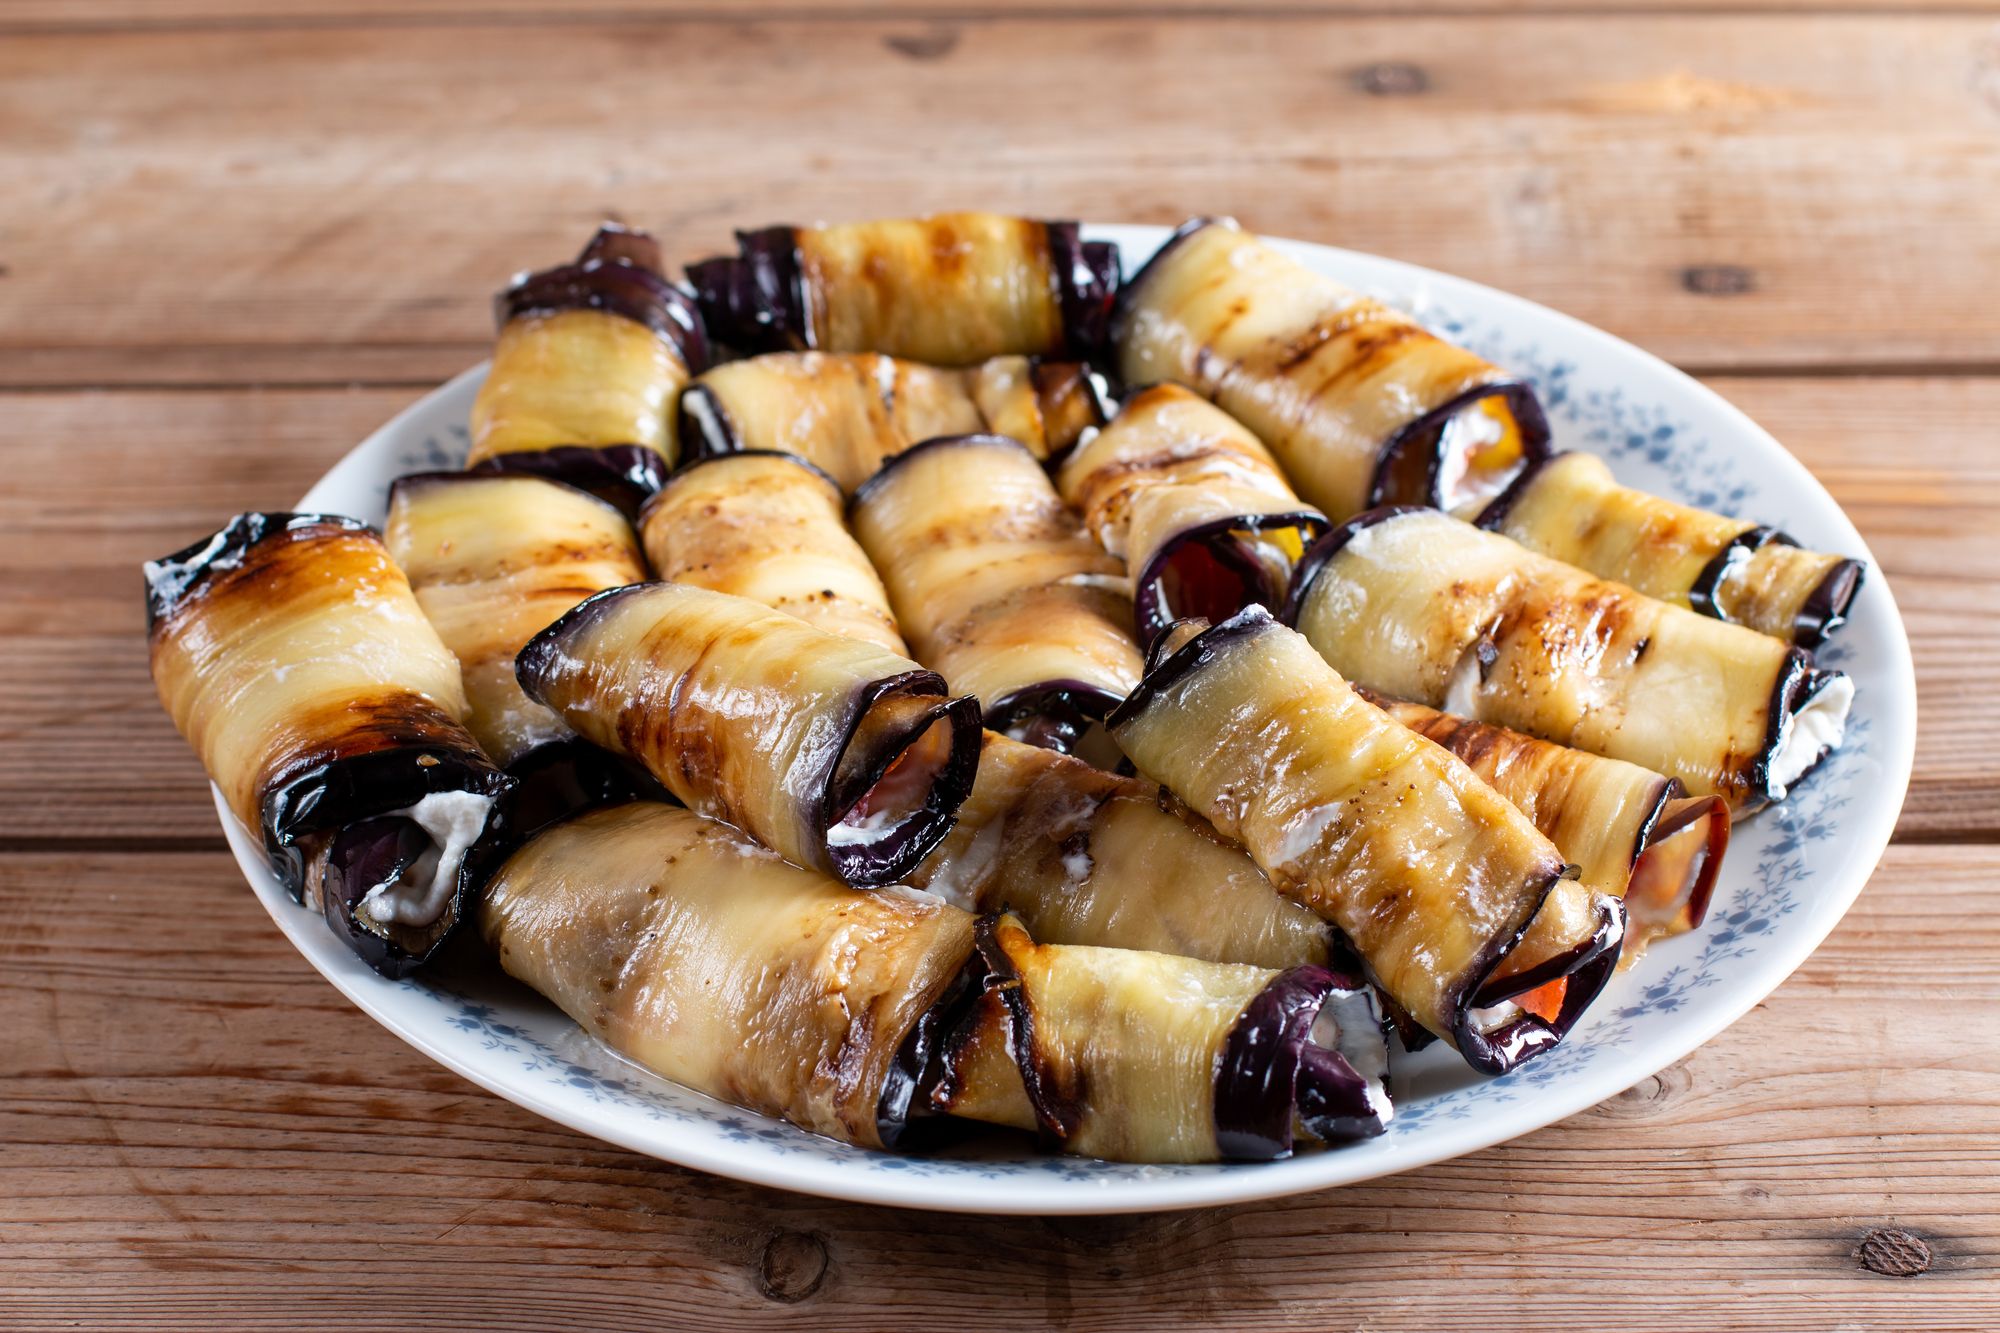 Halloumi and Aubergine ‘Pigs in Blankets’